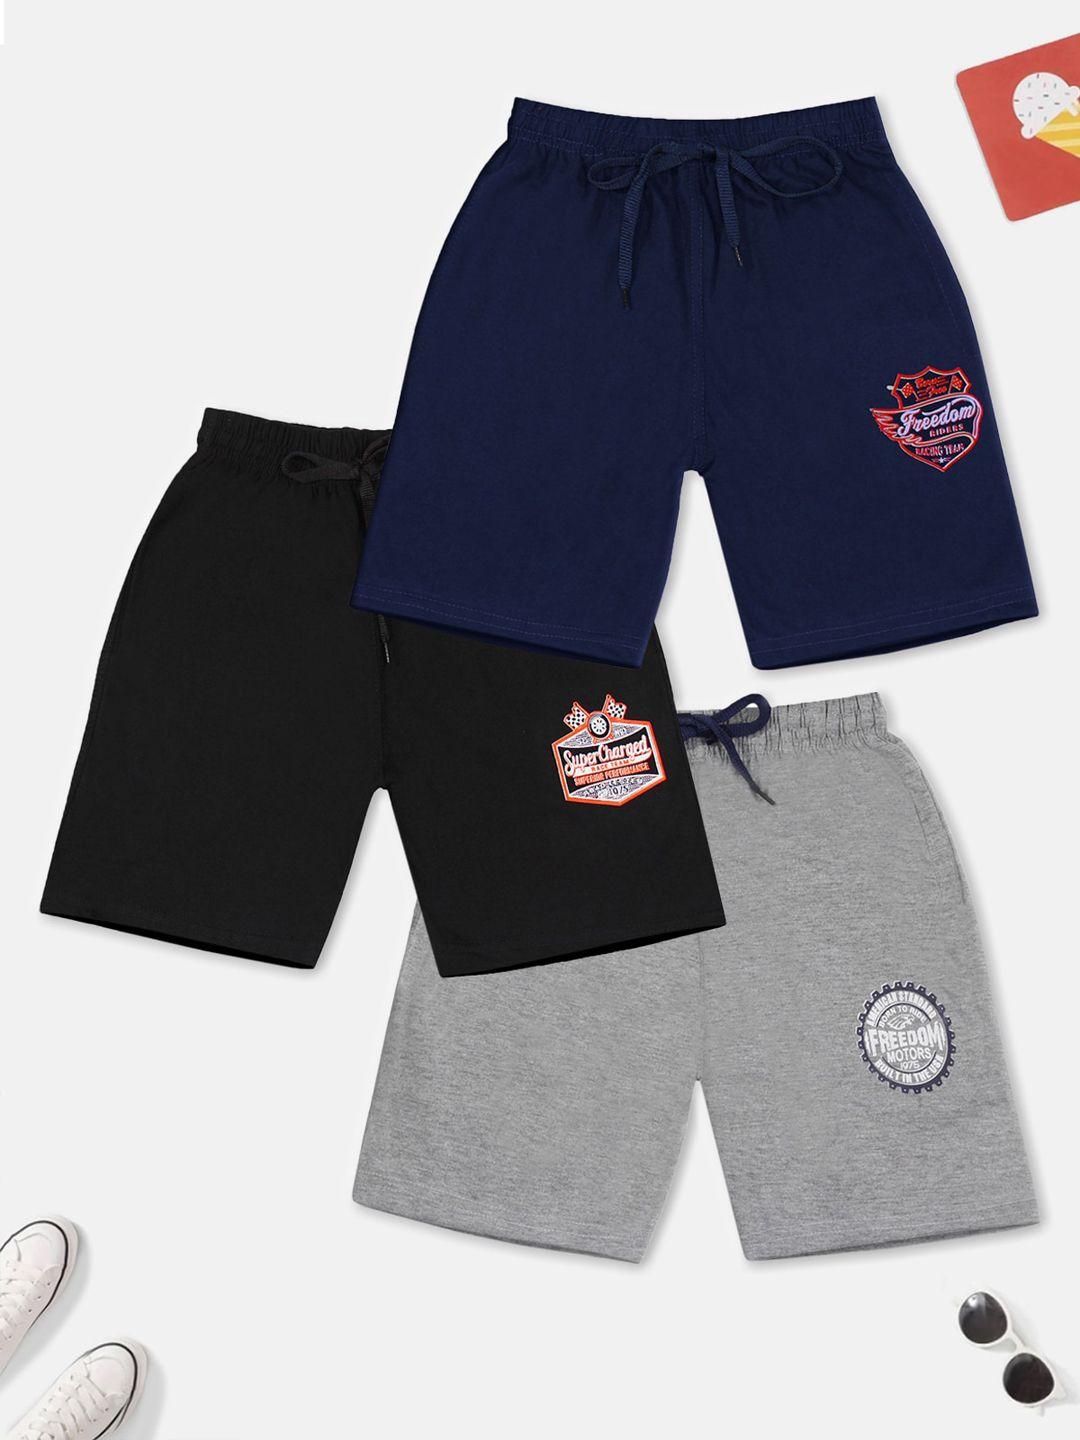 trampoline boys pack of 3 shorts